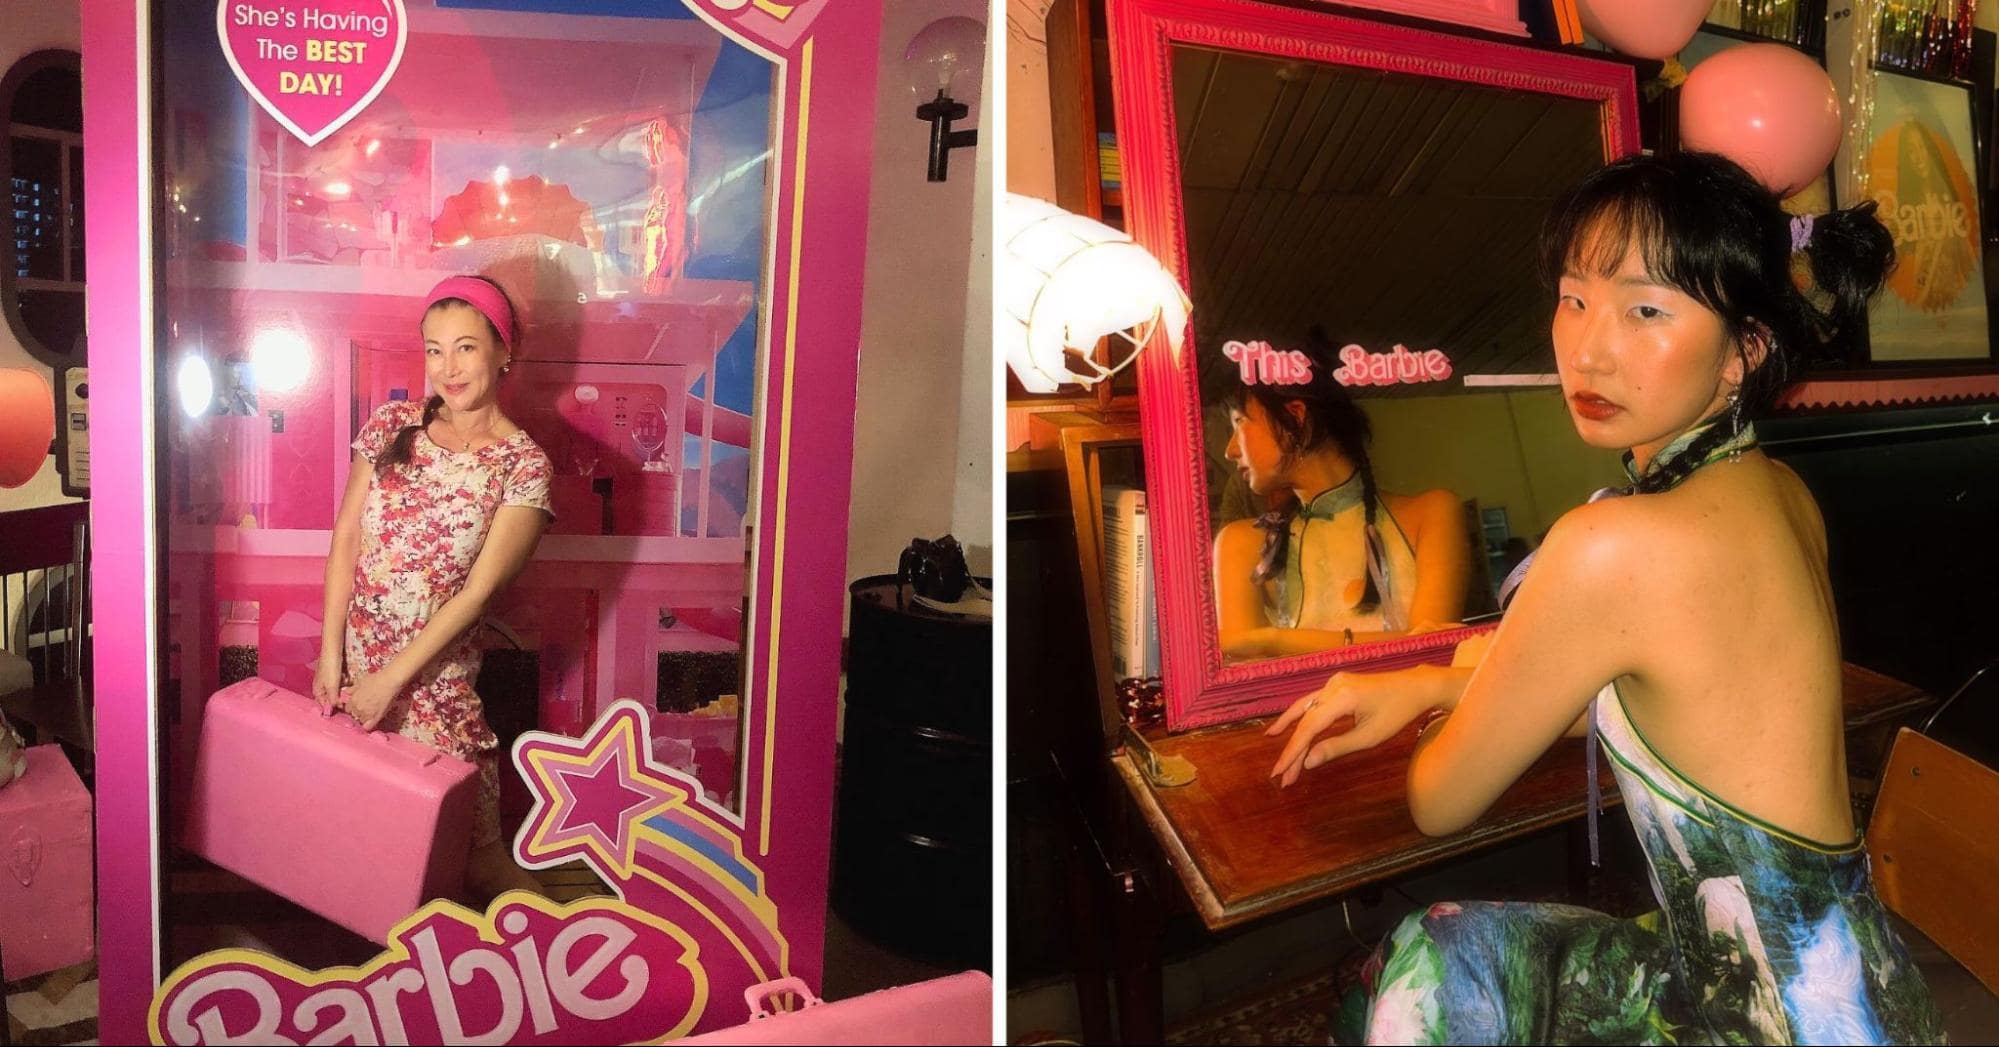 barbie themed photo ops at the projector